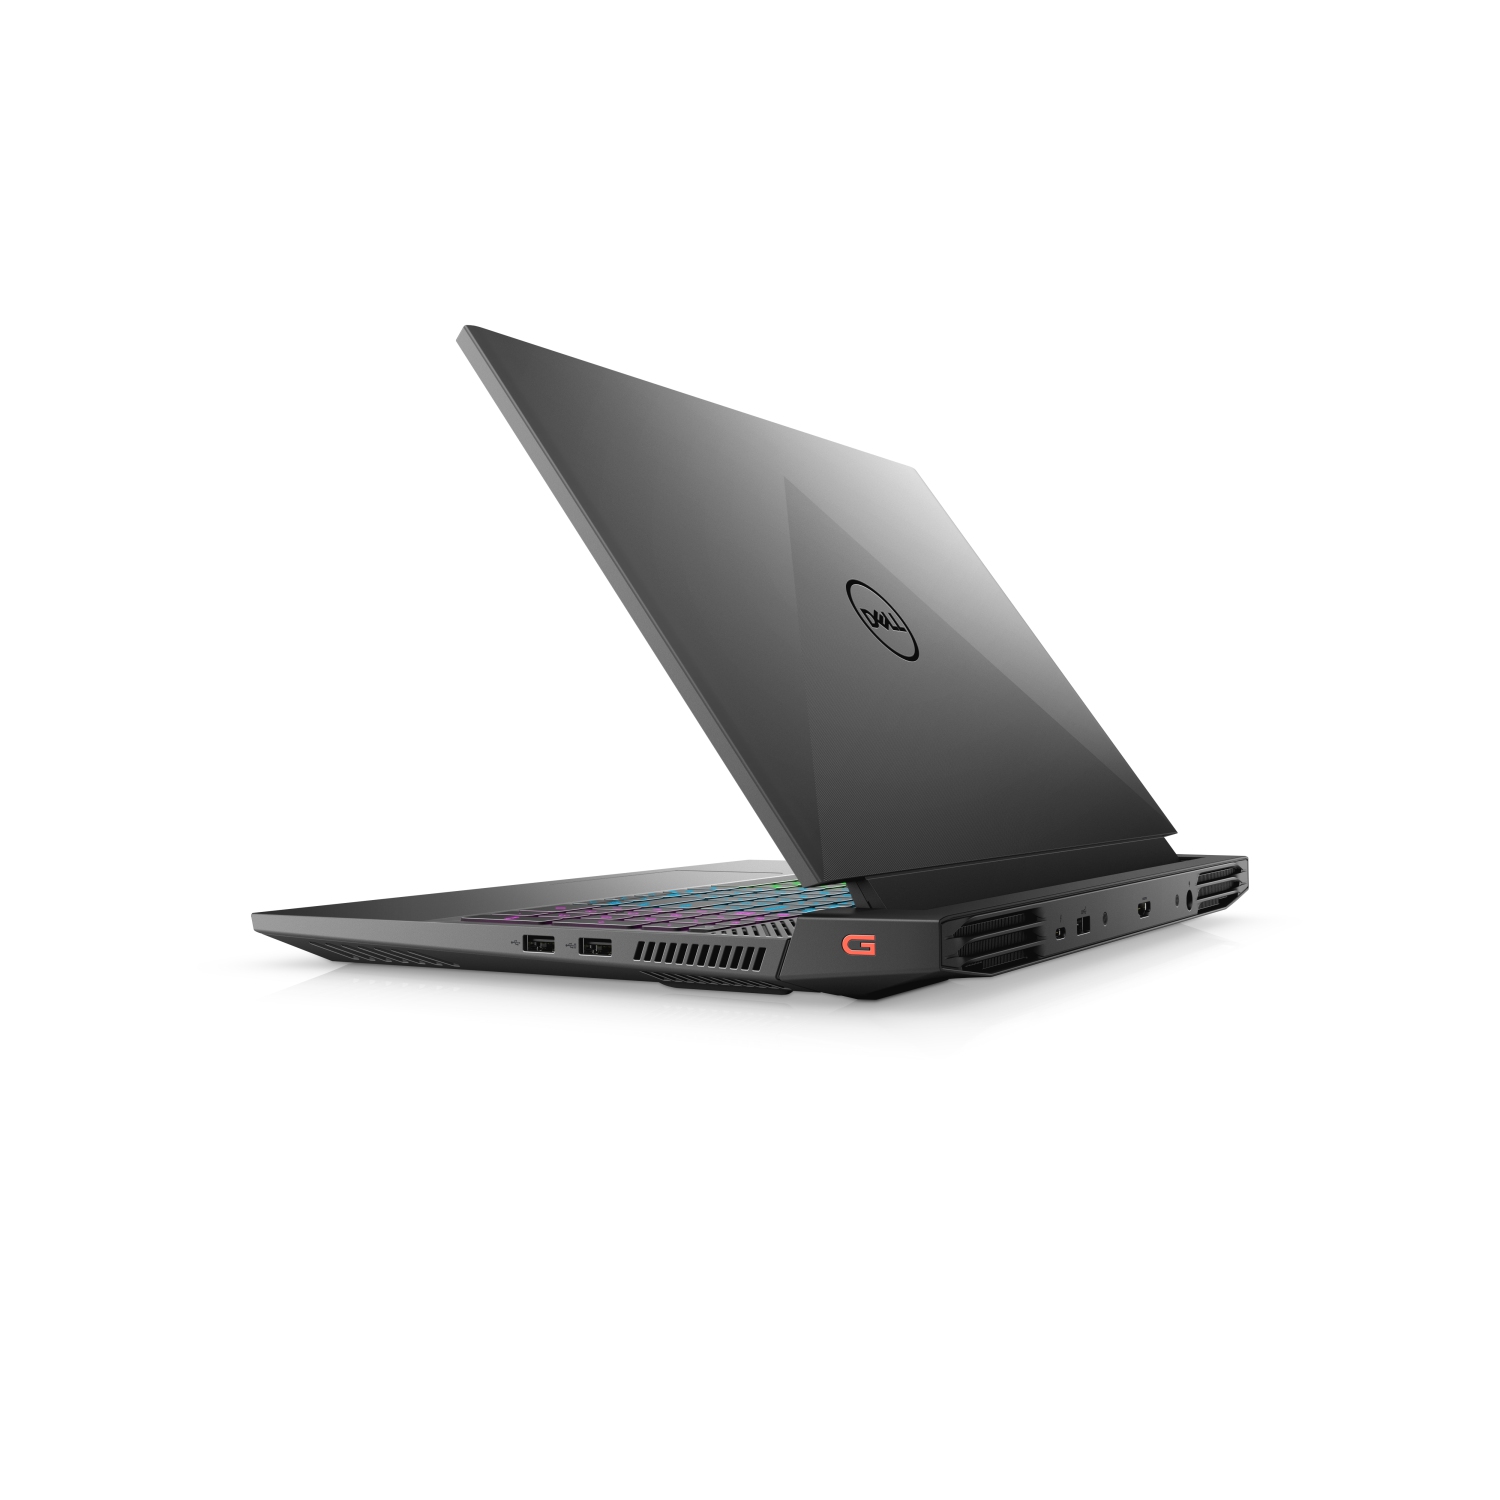 Refurbished (Excellent) - Dell G15 5511 Gaming Laptop (2021), 15.6" FHD, Core i5 - 256GB SSD - 8GB RAM - RTX 3050, 6 Cores @ 4.5 GHz - 11th Gen CPU Certified Refurbished